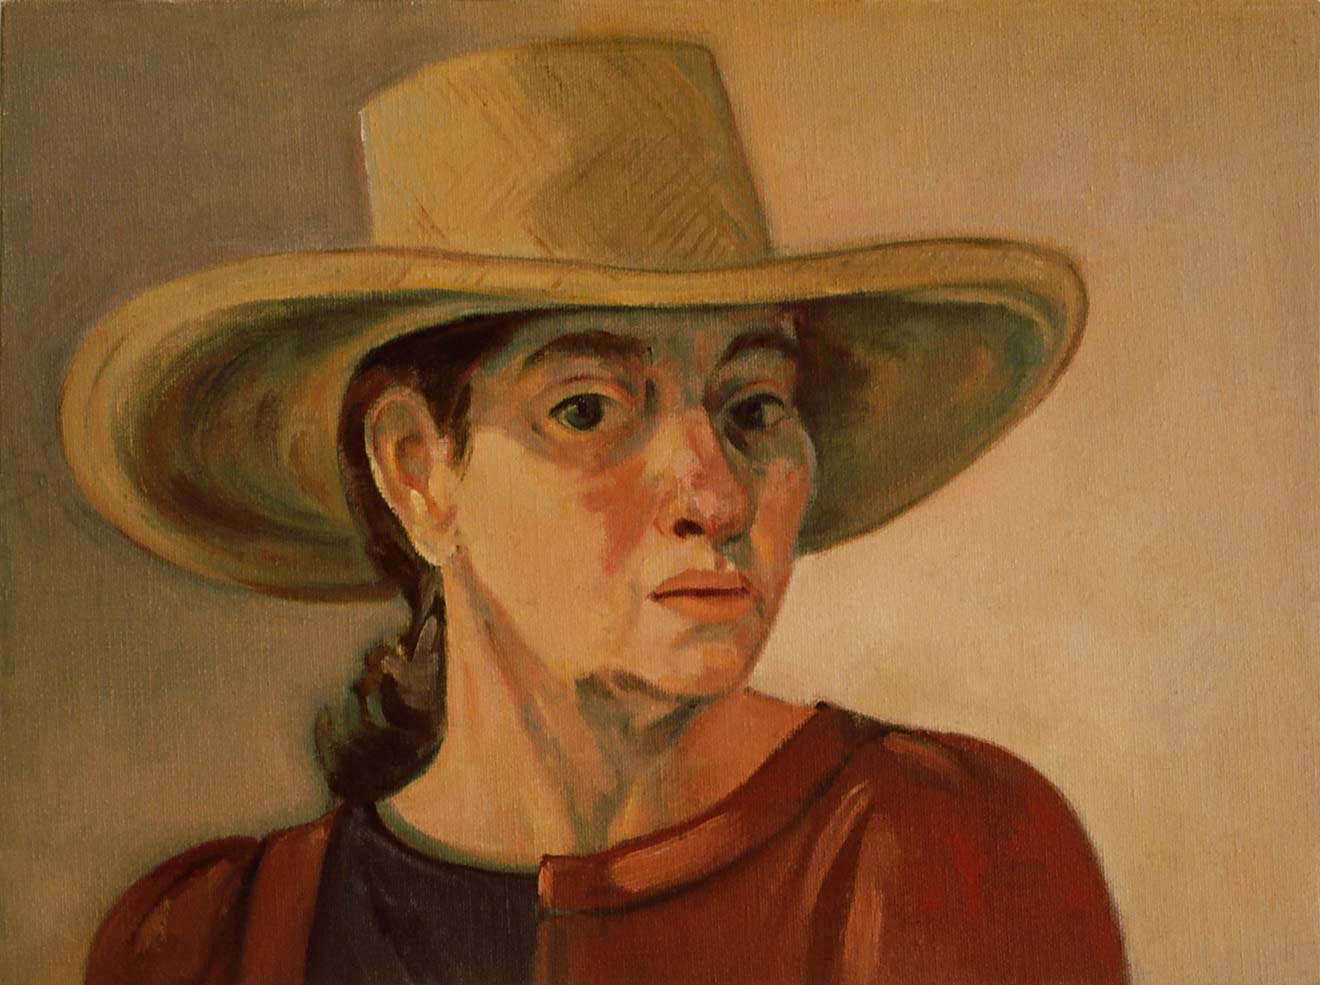 Thumbnail of Self Portrait in Straw Hat: by Ethel Fisher, 1988, oil on canvas, 12 x 16 inches, twentieth century figure painting.